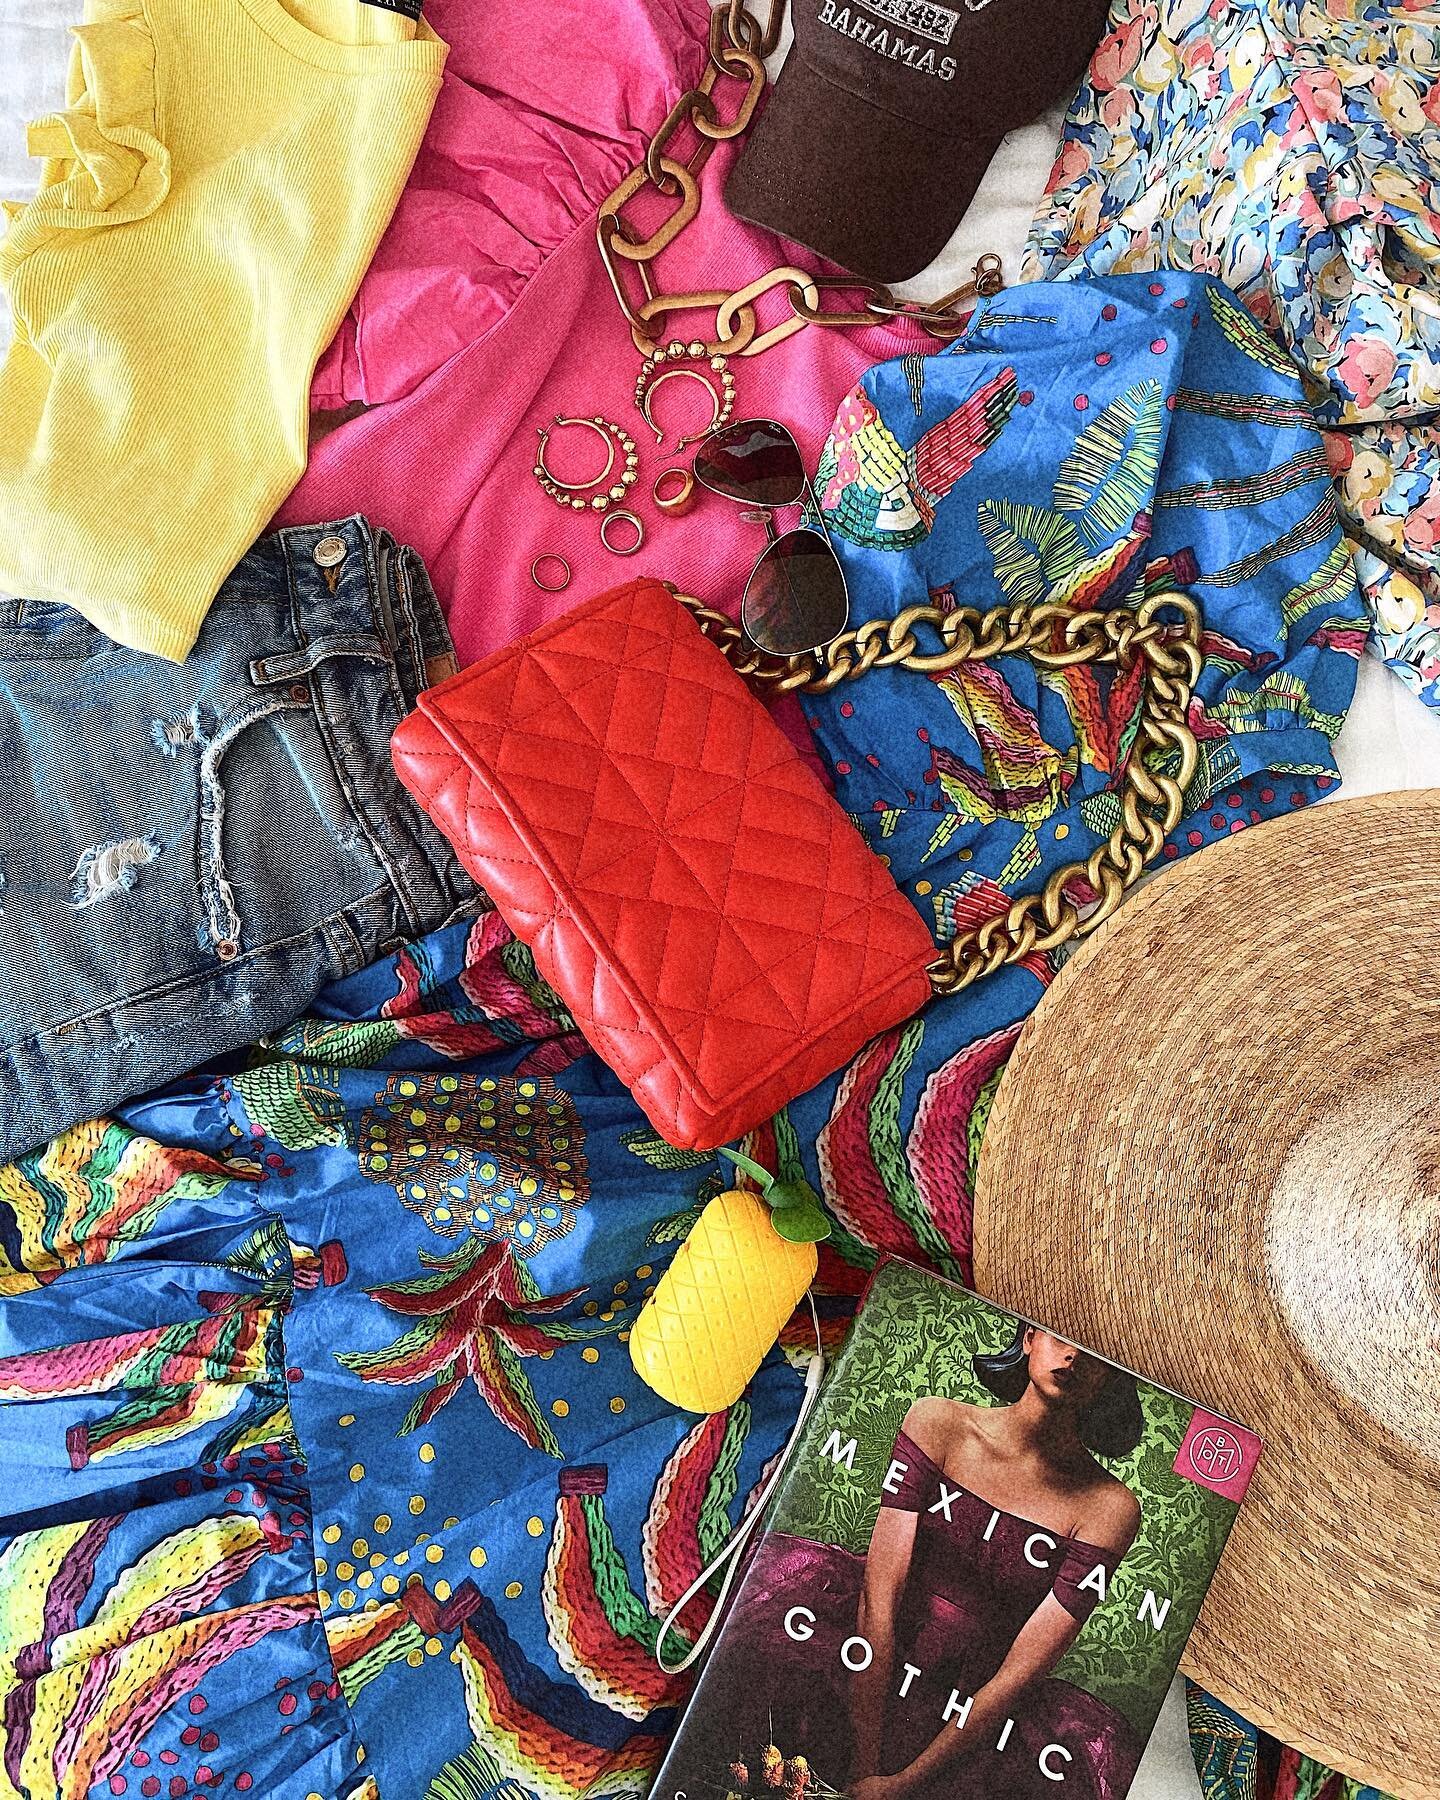 c o l o r ❤️🧡💛💚💙💜 

#vacationoutfits #vacayoutfit #colorful #wardrobe #ootdfashion #flatlaystyle #summertime #summerstyle #styleinspiration #latinablogger #traveloutfits